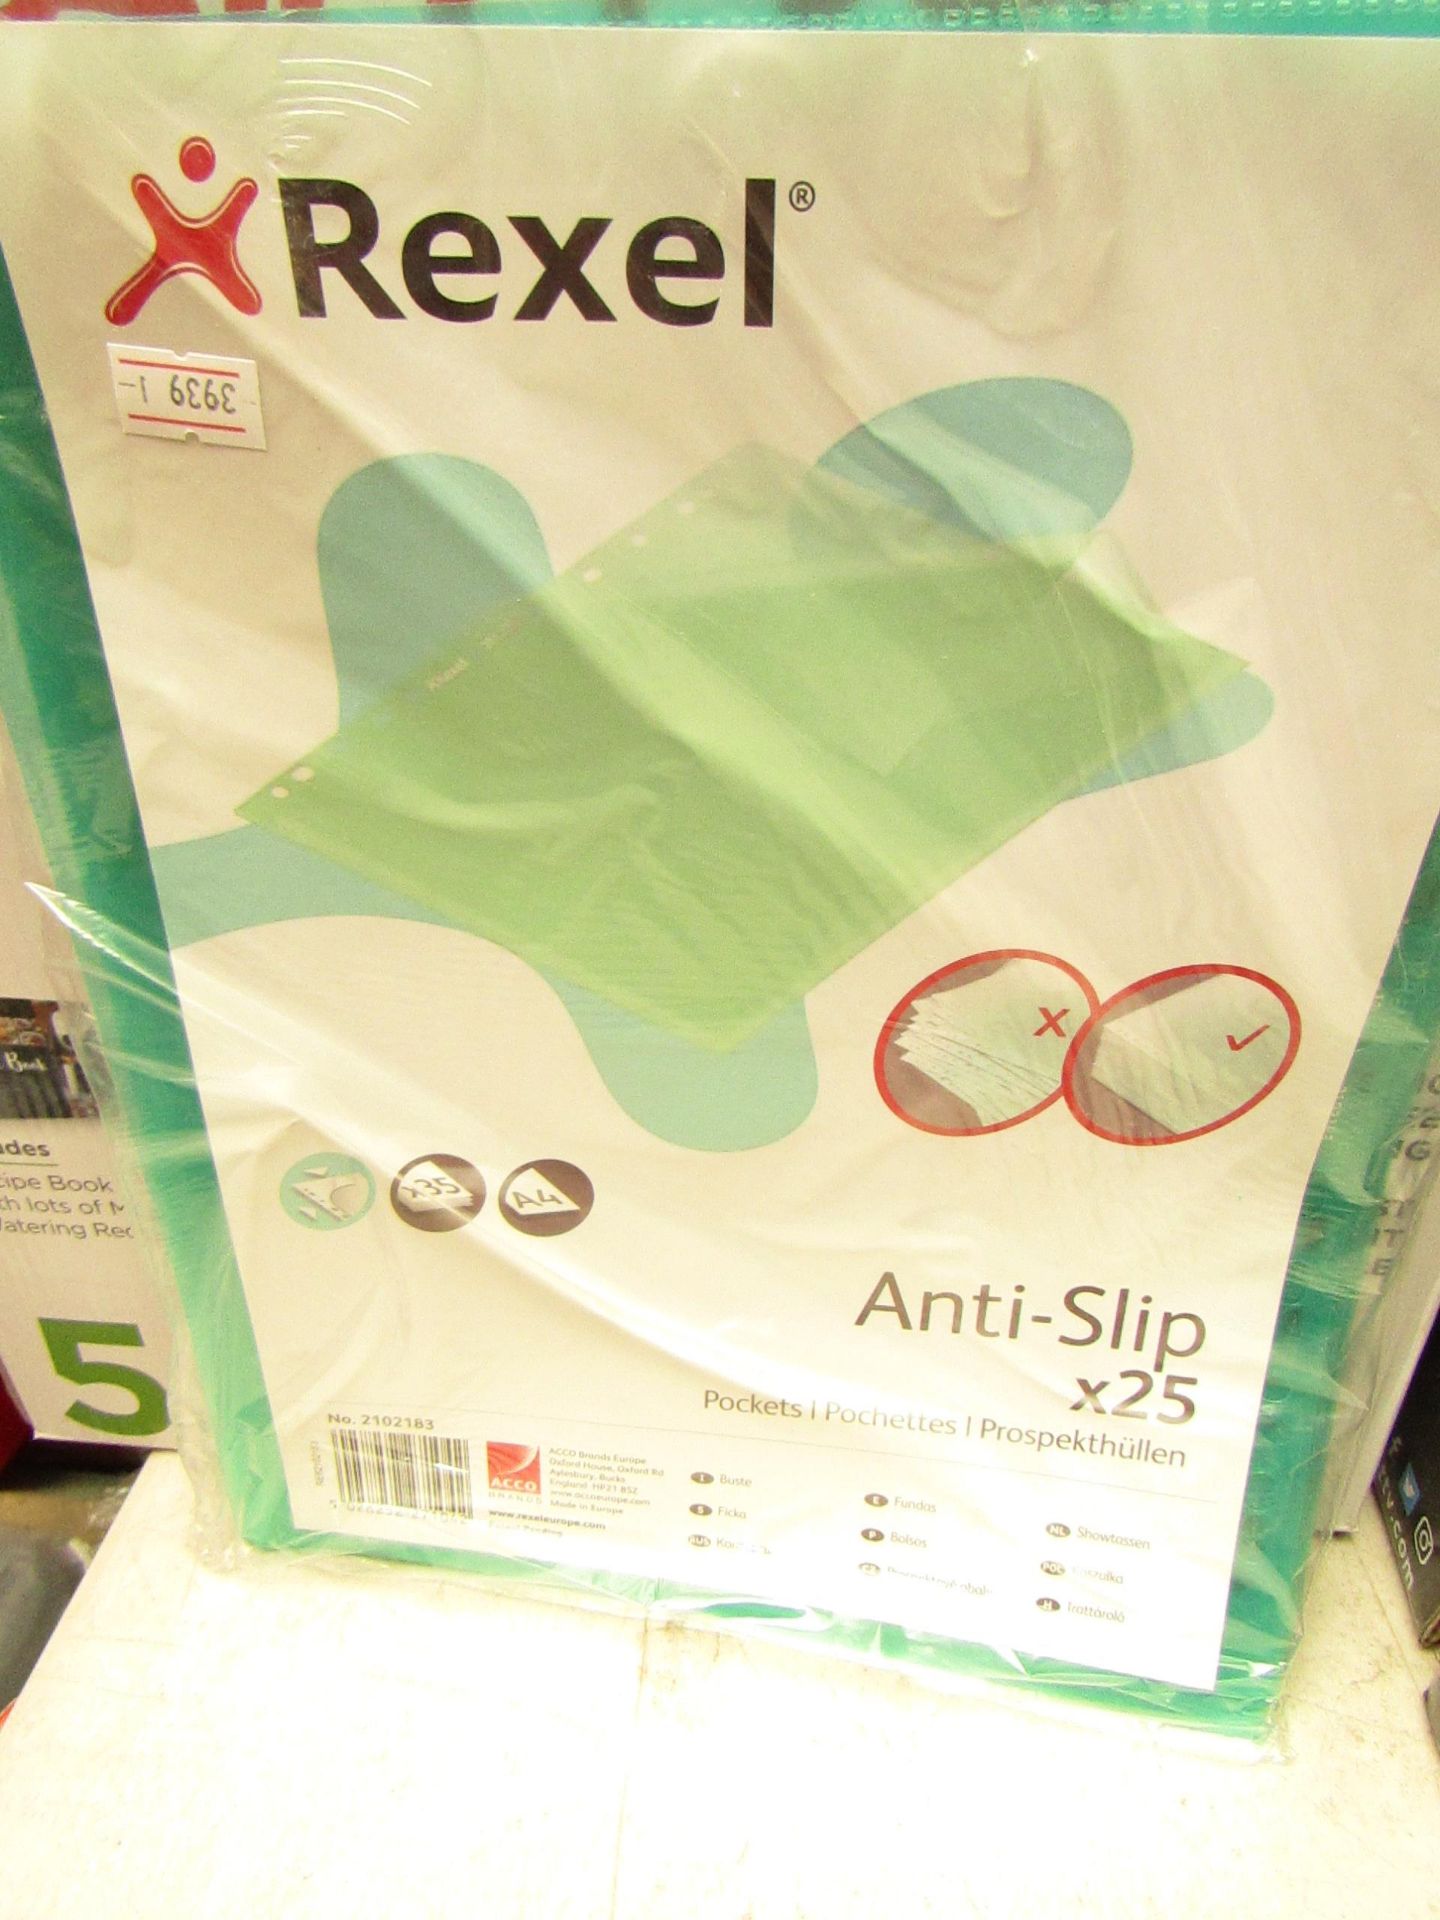 4 Packs of 25 Rexel Anti Slip Pockets. A4 Size. New & packaged